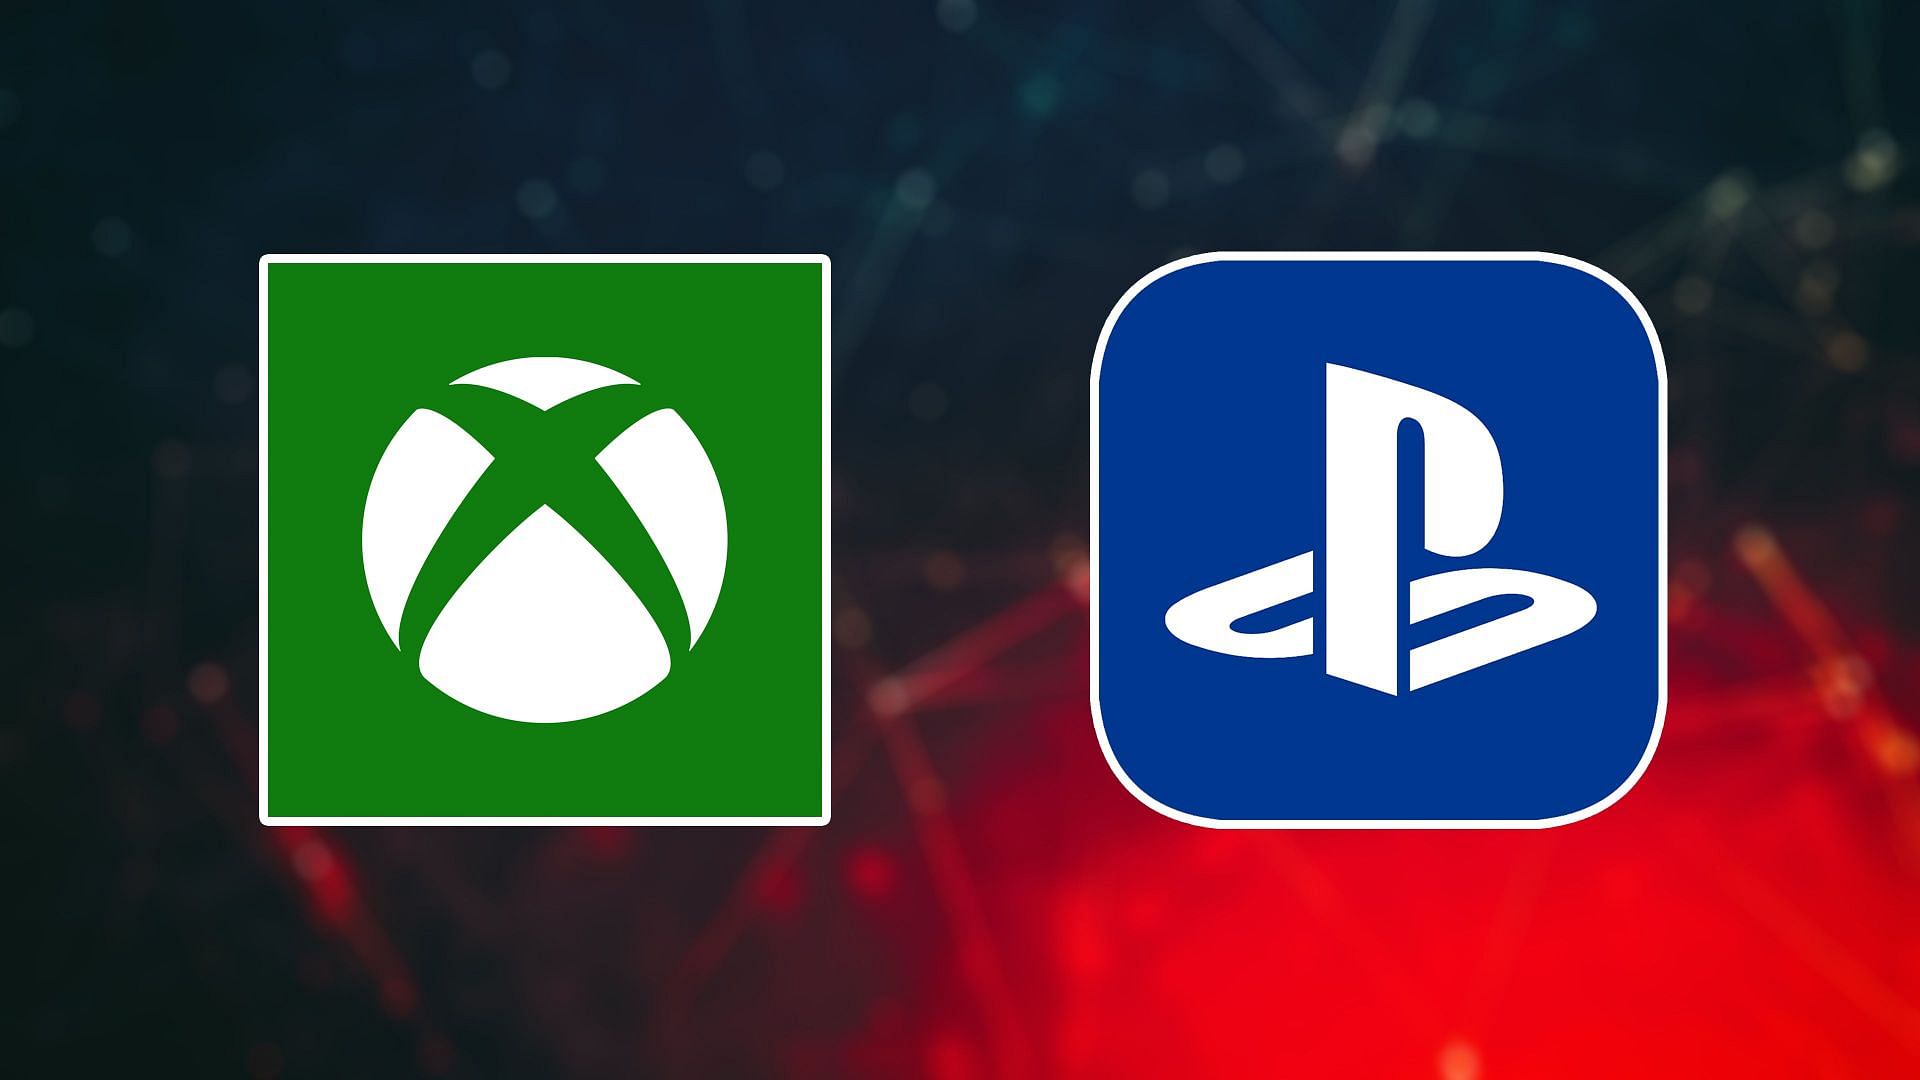 Microsoft stated that the next generation of consoles, such as the PlayStation 6 and the next Xbox, are expected to be released in 2028. 